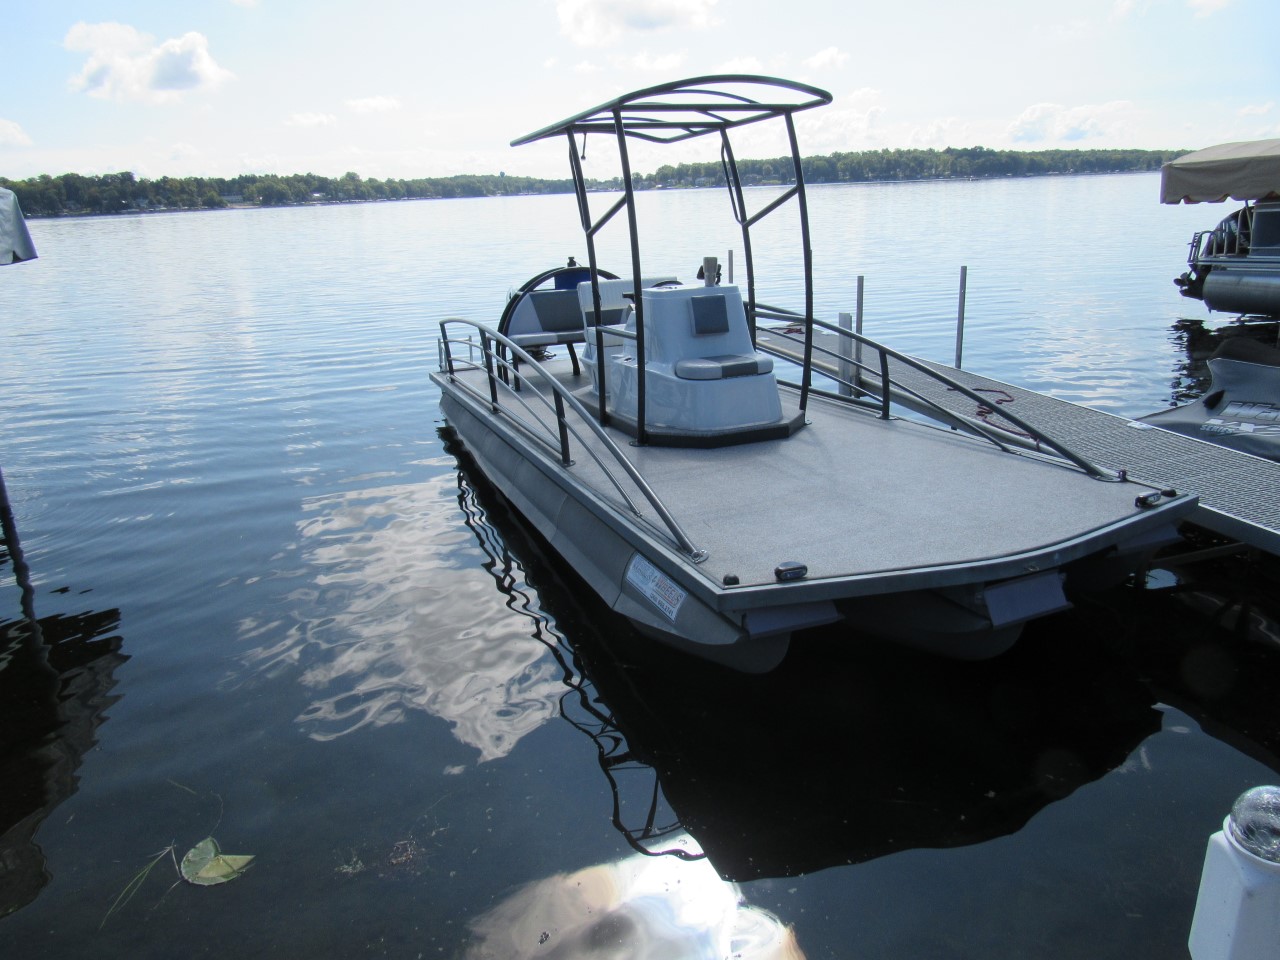 Unique custom pontoon boat with third tube installed